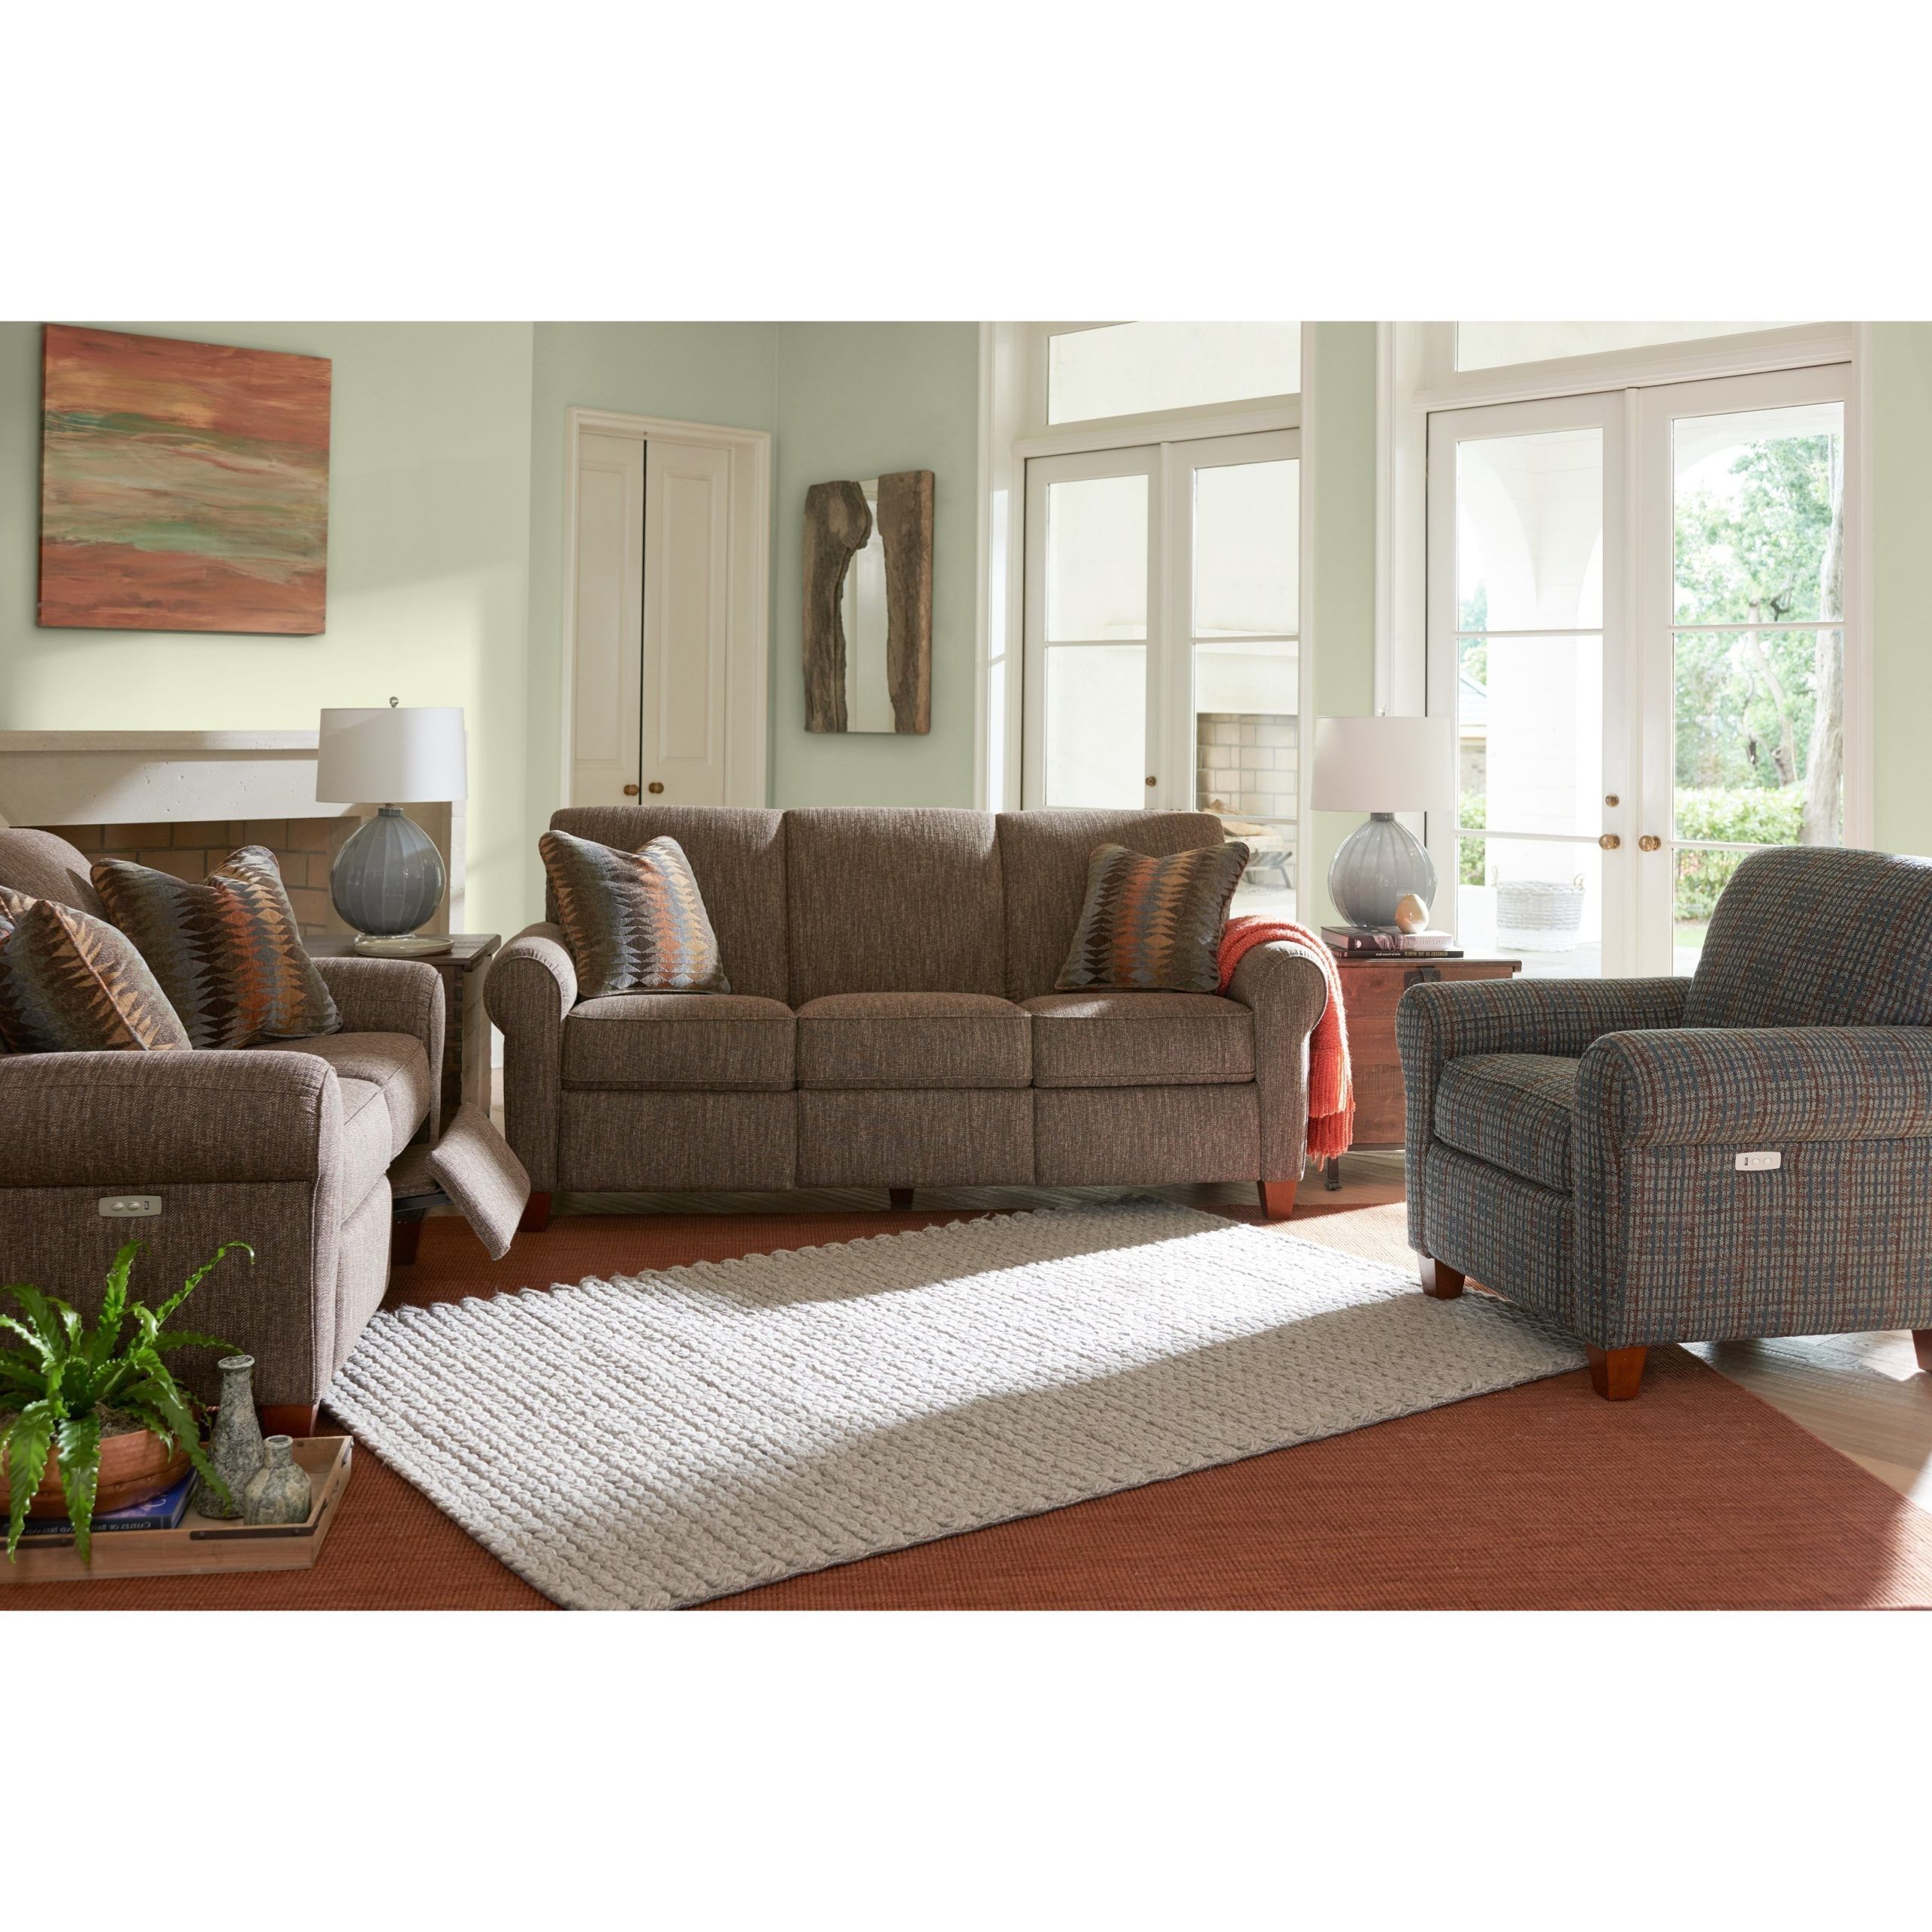 Widely Used 8 Images Bennett Sofa Lazy Boy And Review – Alqu Blog Inside Bennett Power Reclining Sofas (View 8 of 15)